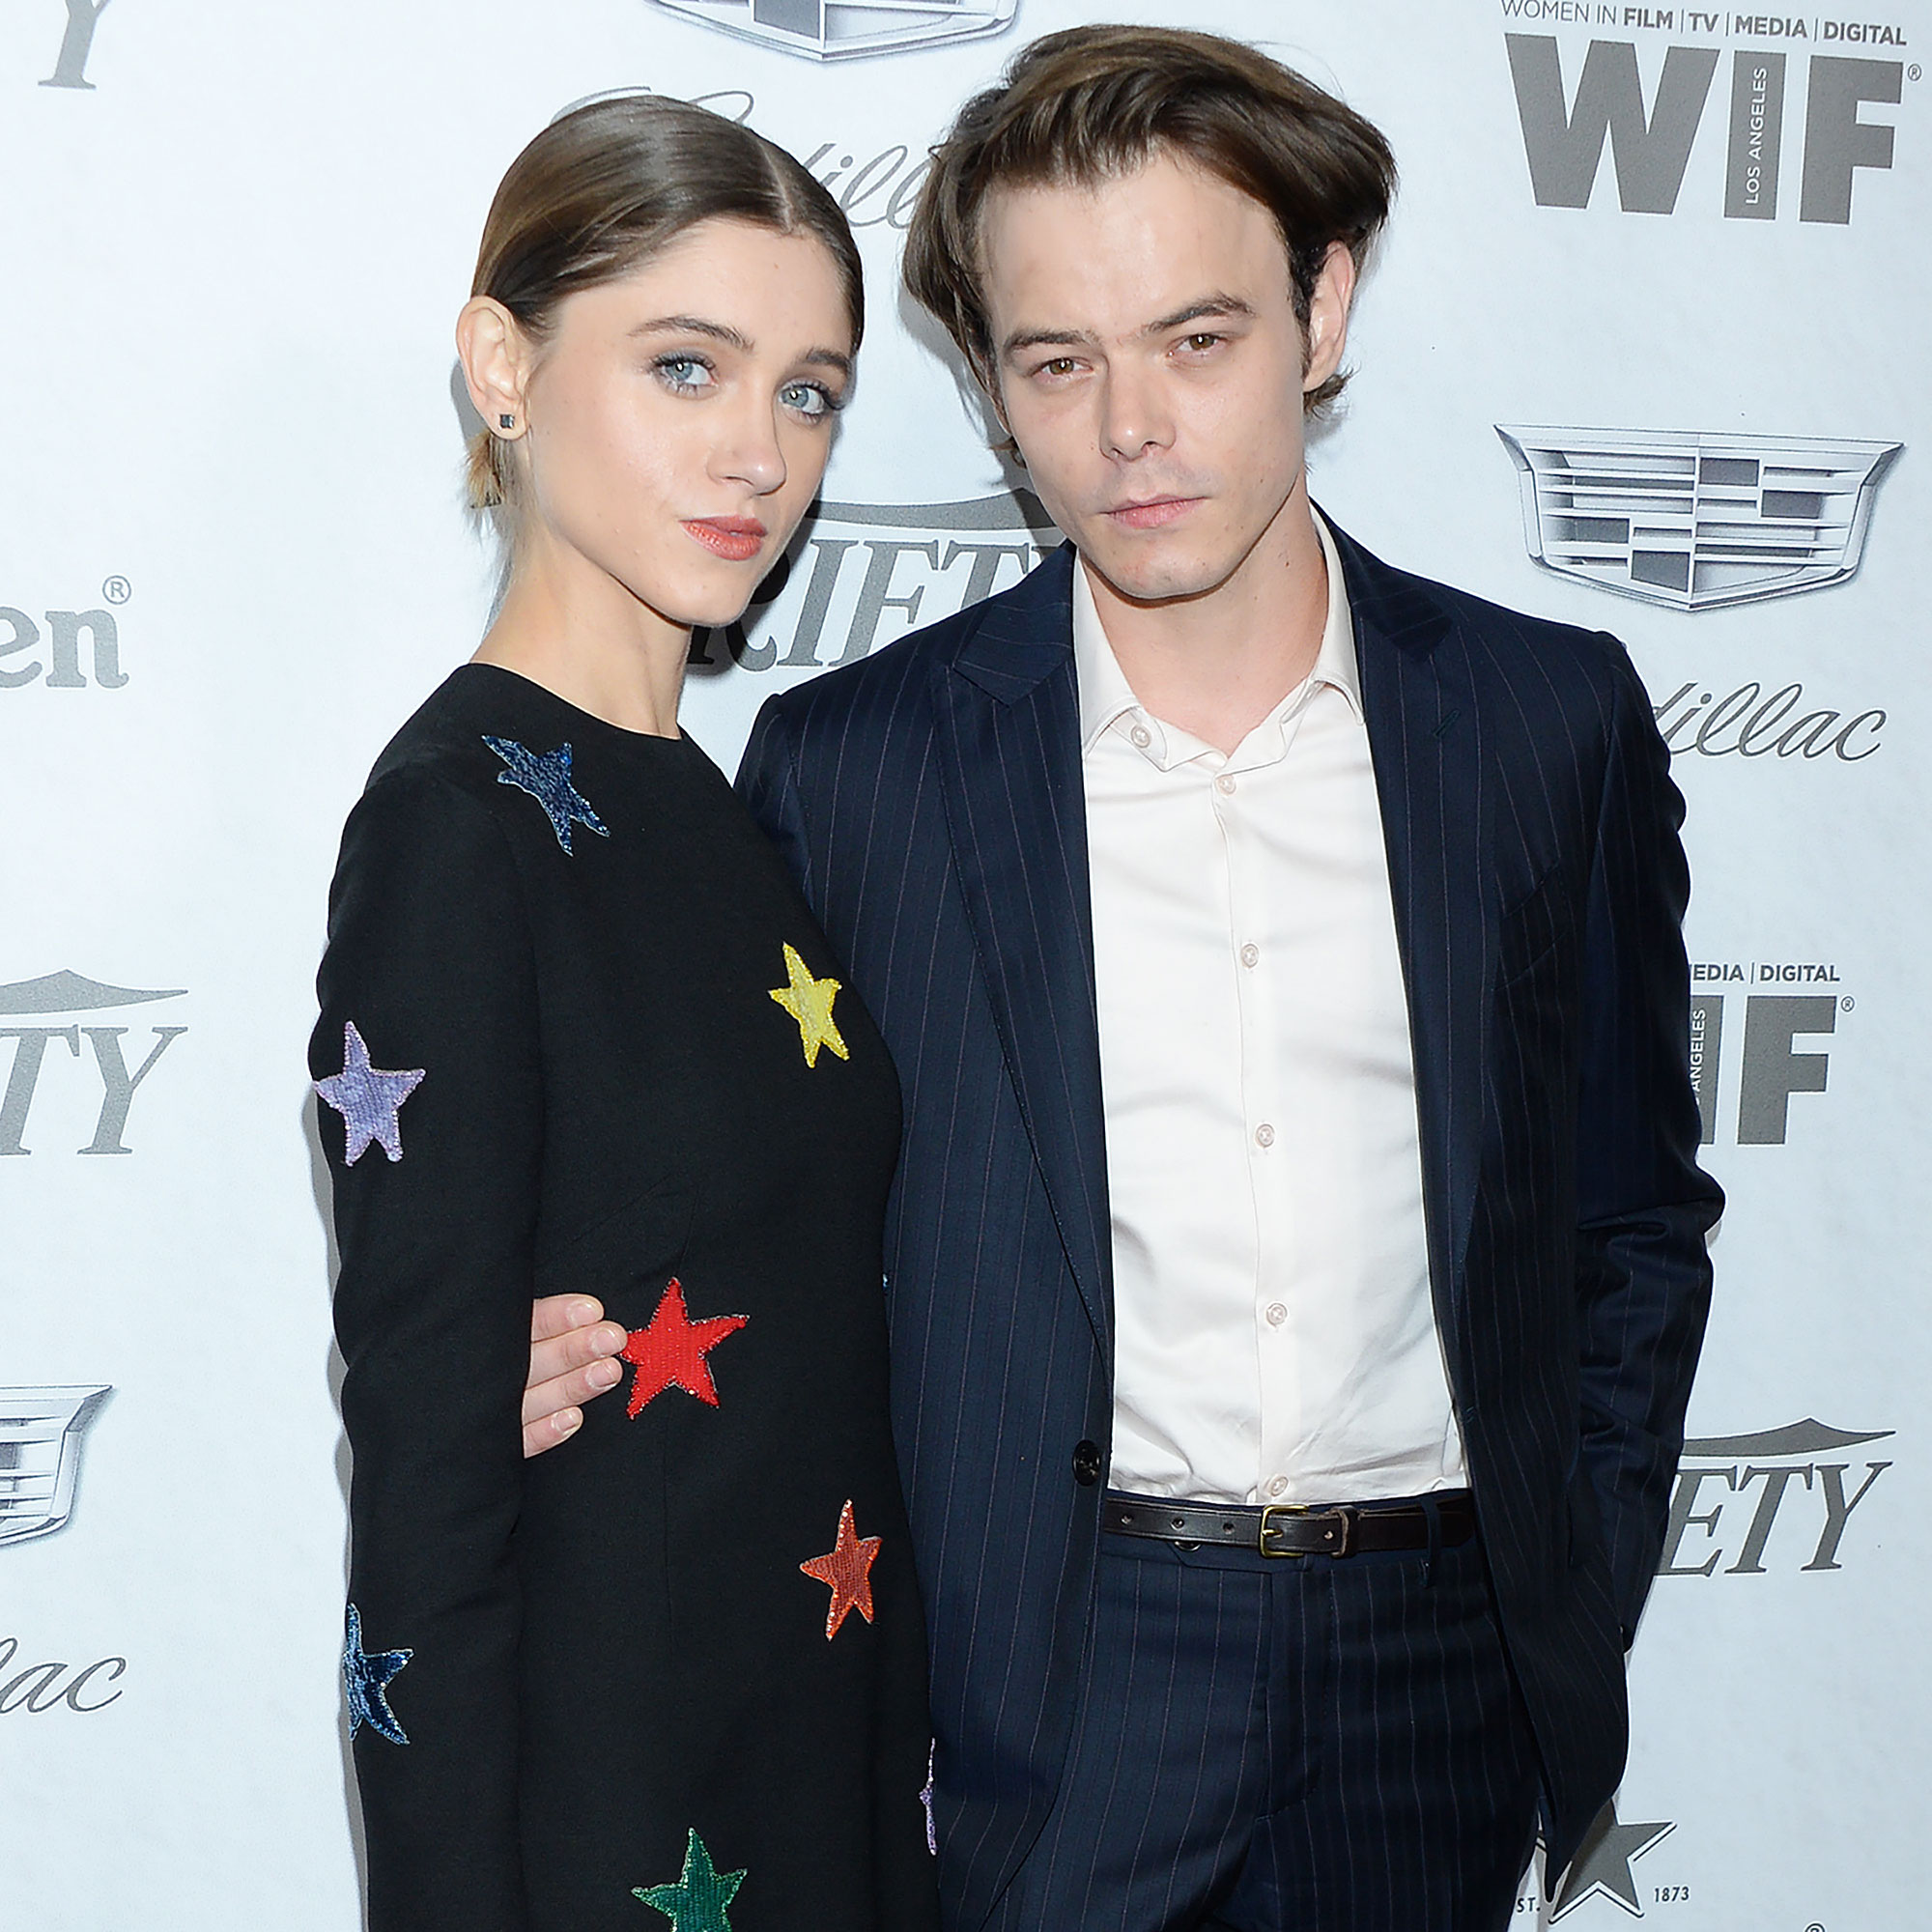 Photos Show the Best Style Moments 'Stranger Things' Couple Has Had